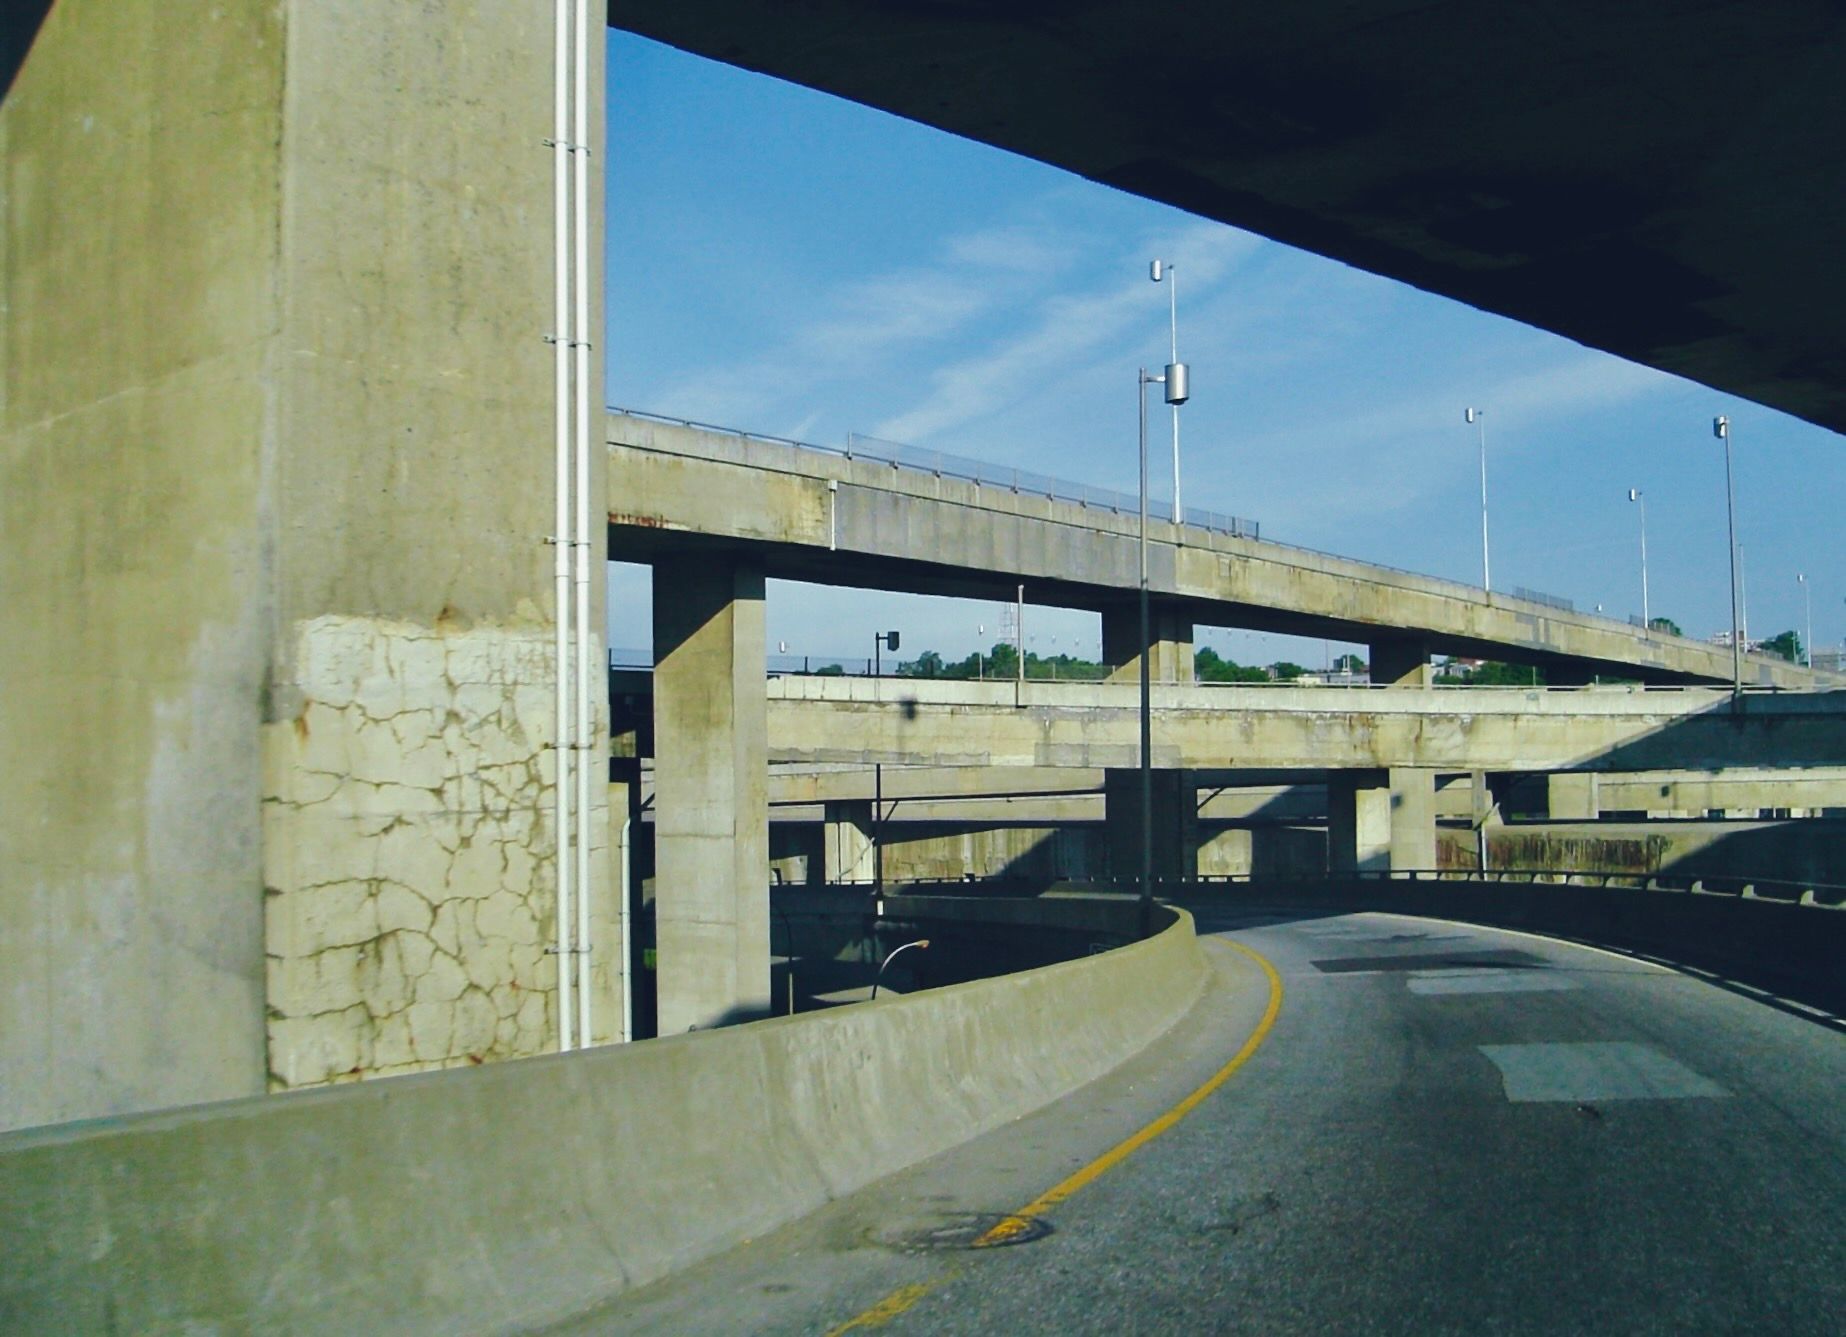 A cracked and discolored cement 4-level highway overpass under a blue sky.